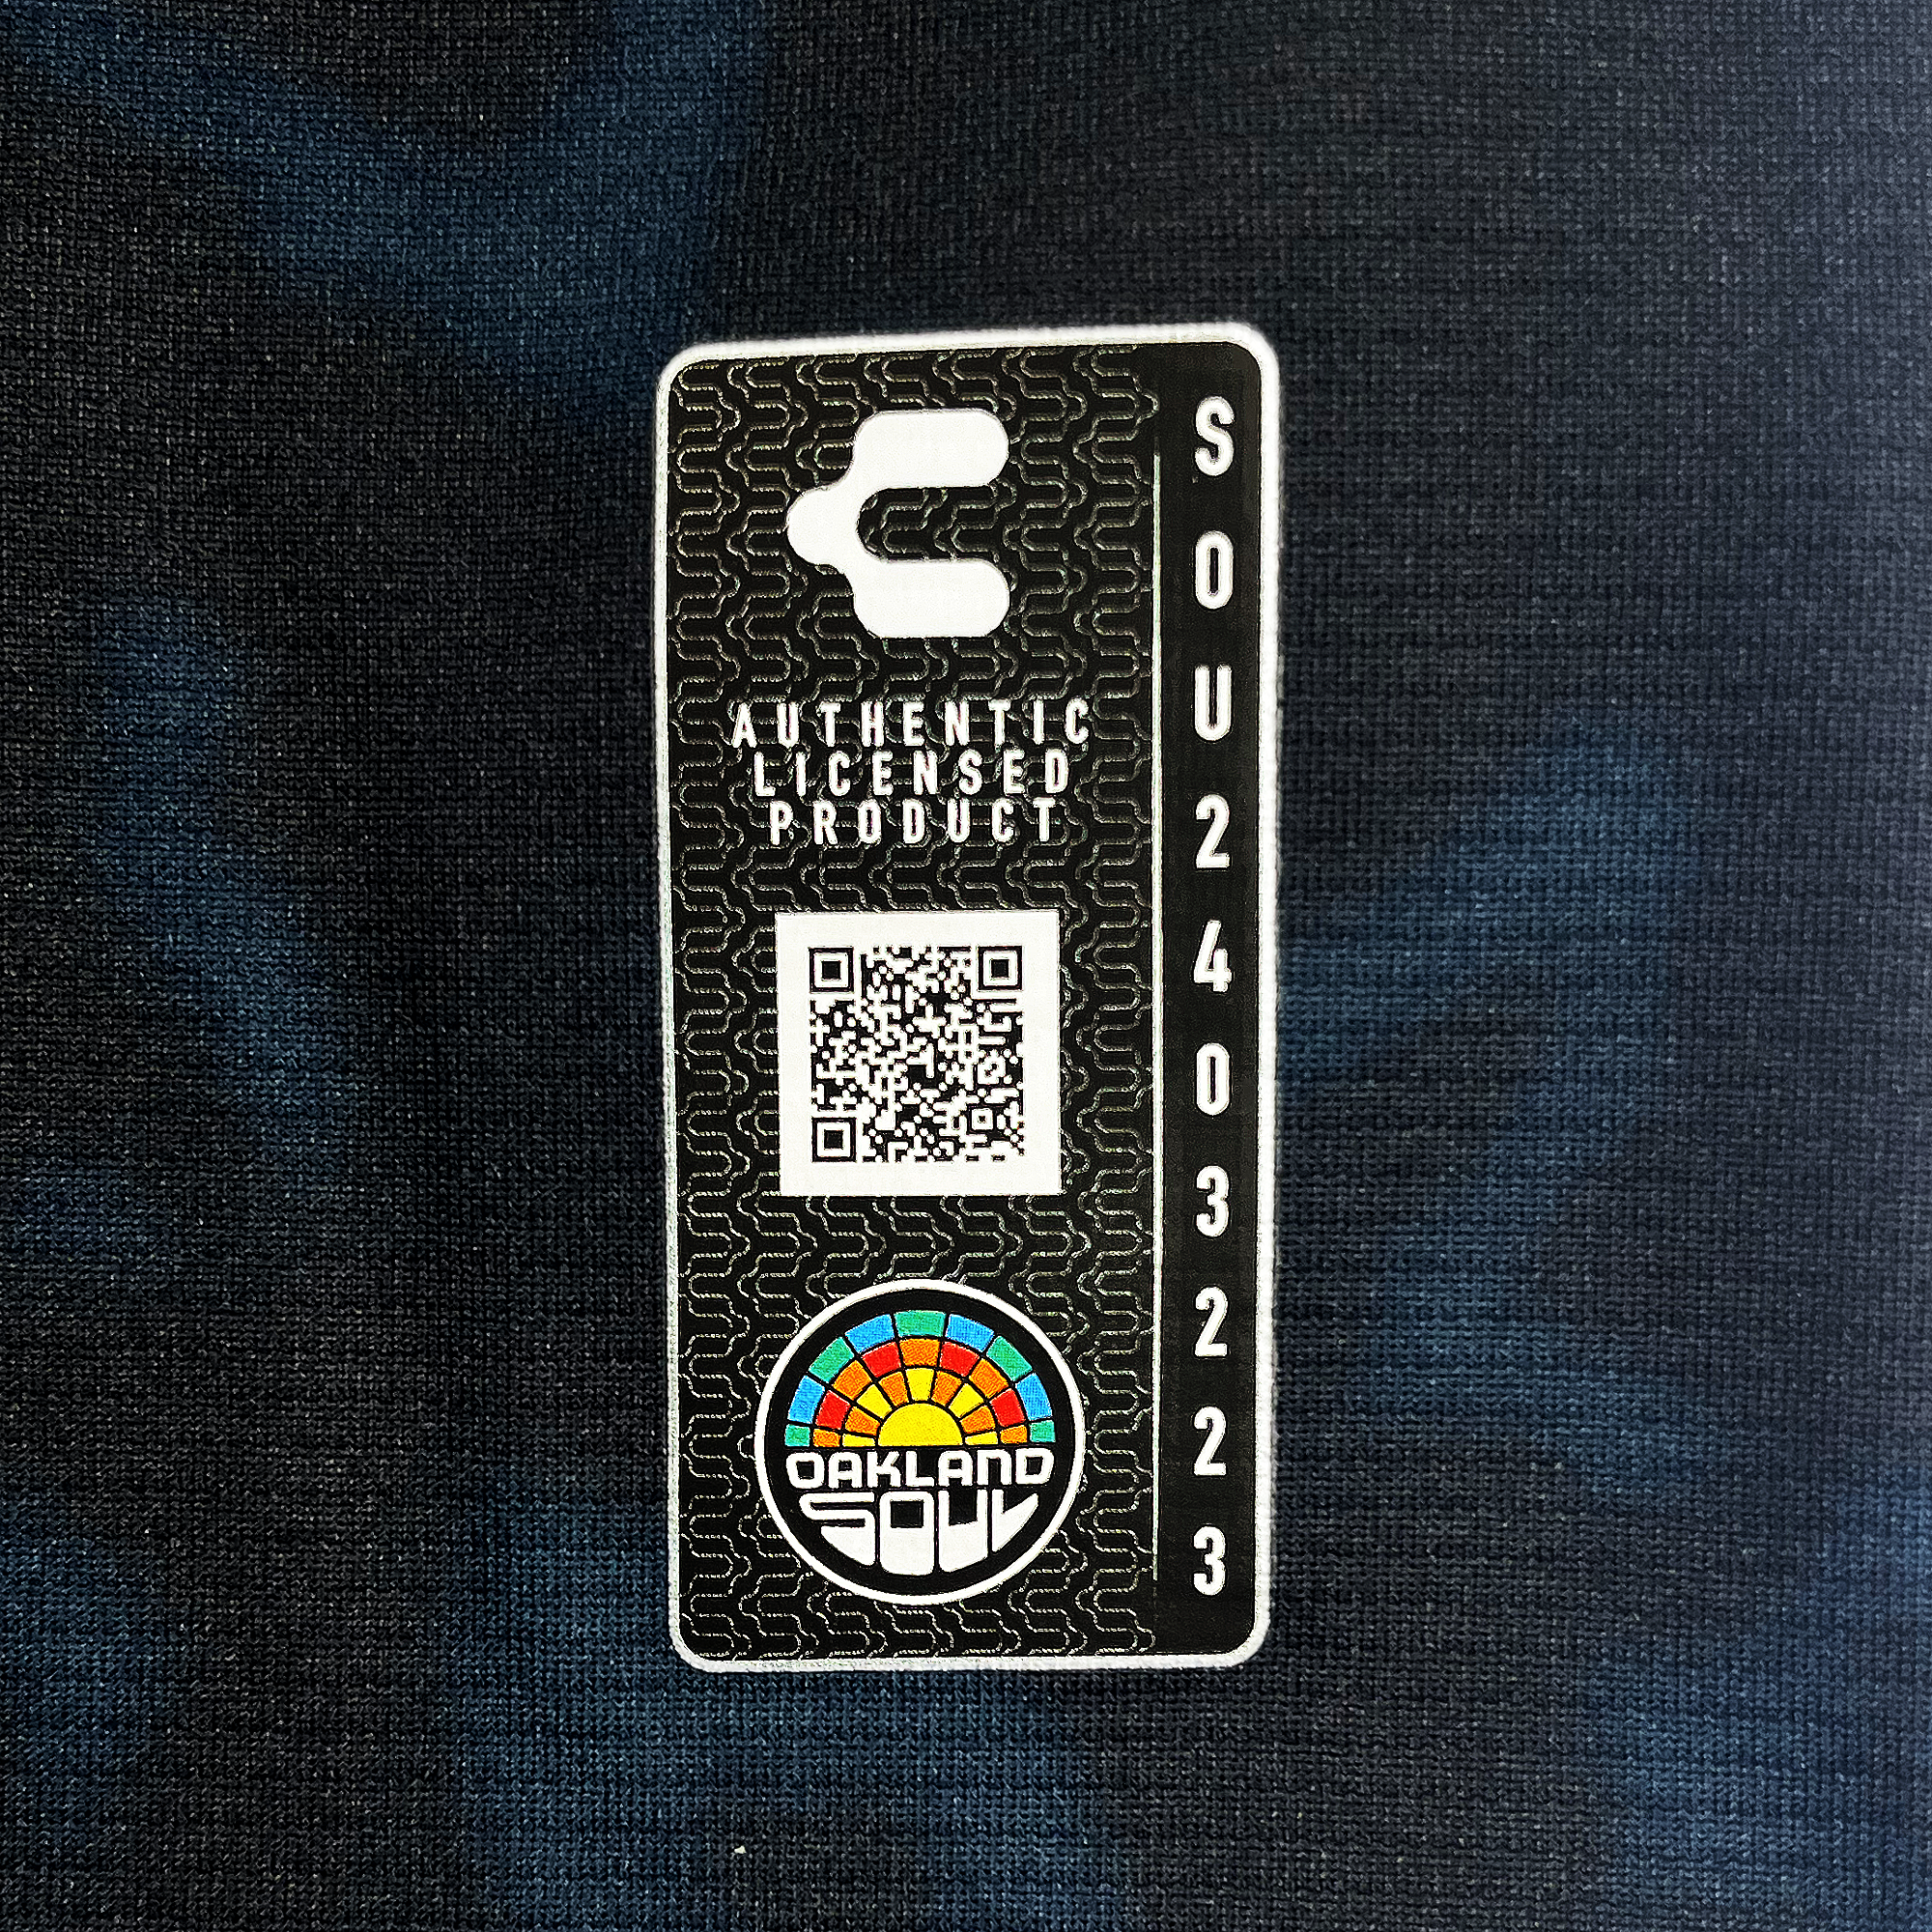 Detailed view of Oakland Soul authentication QR code/